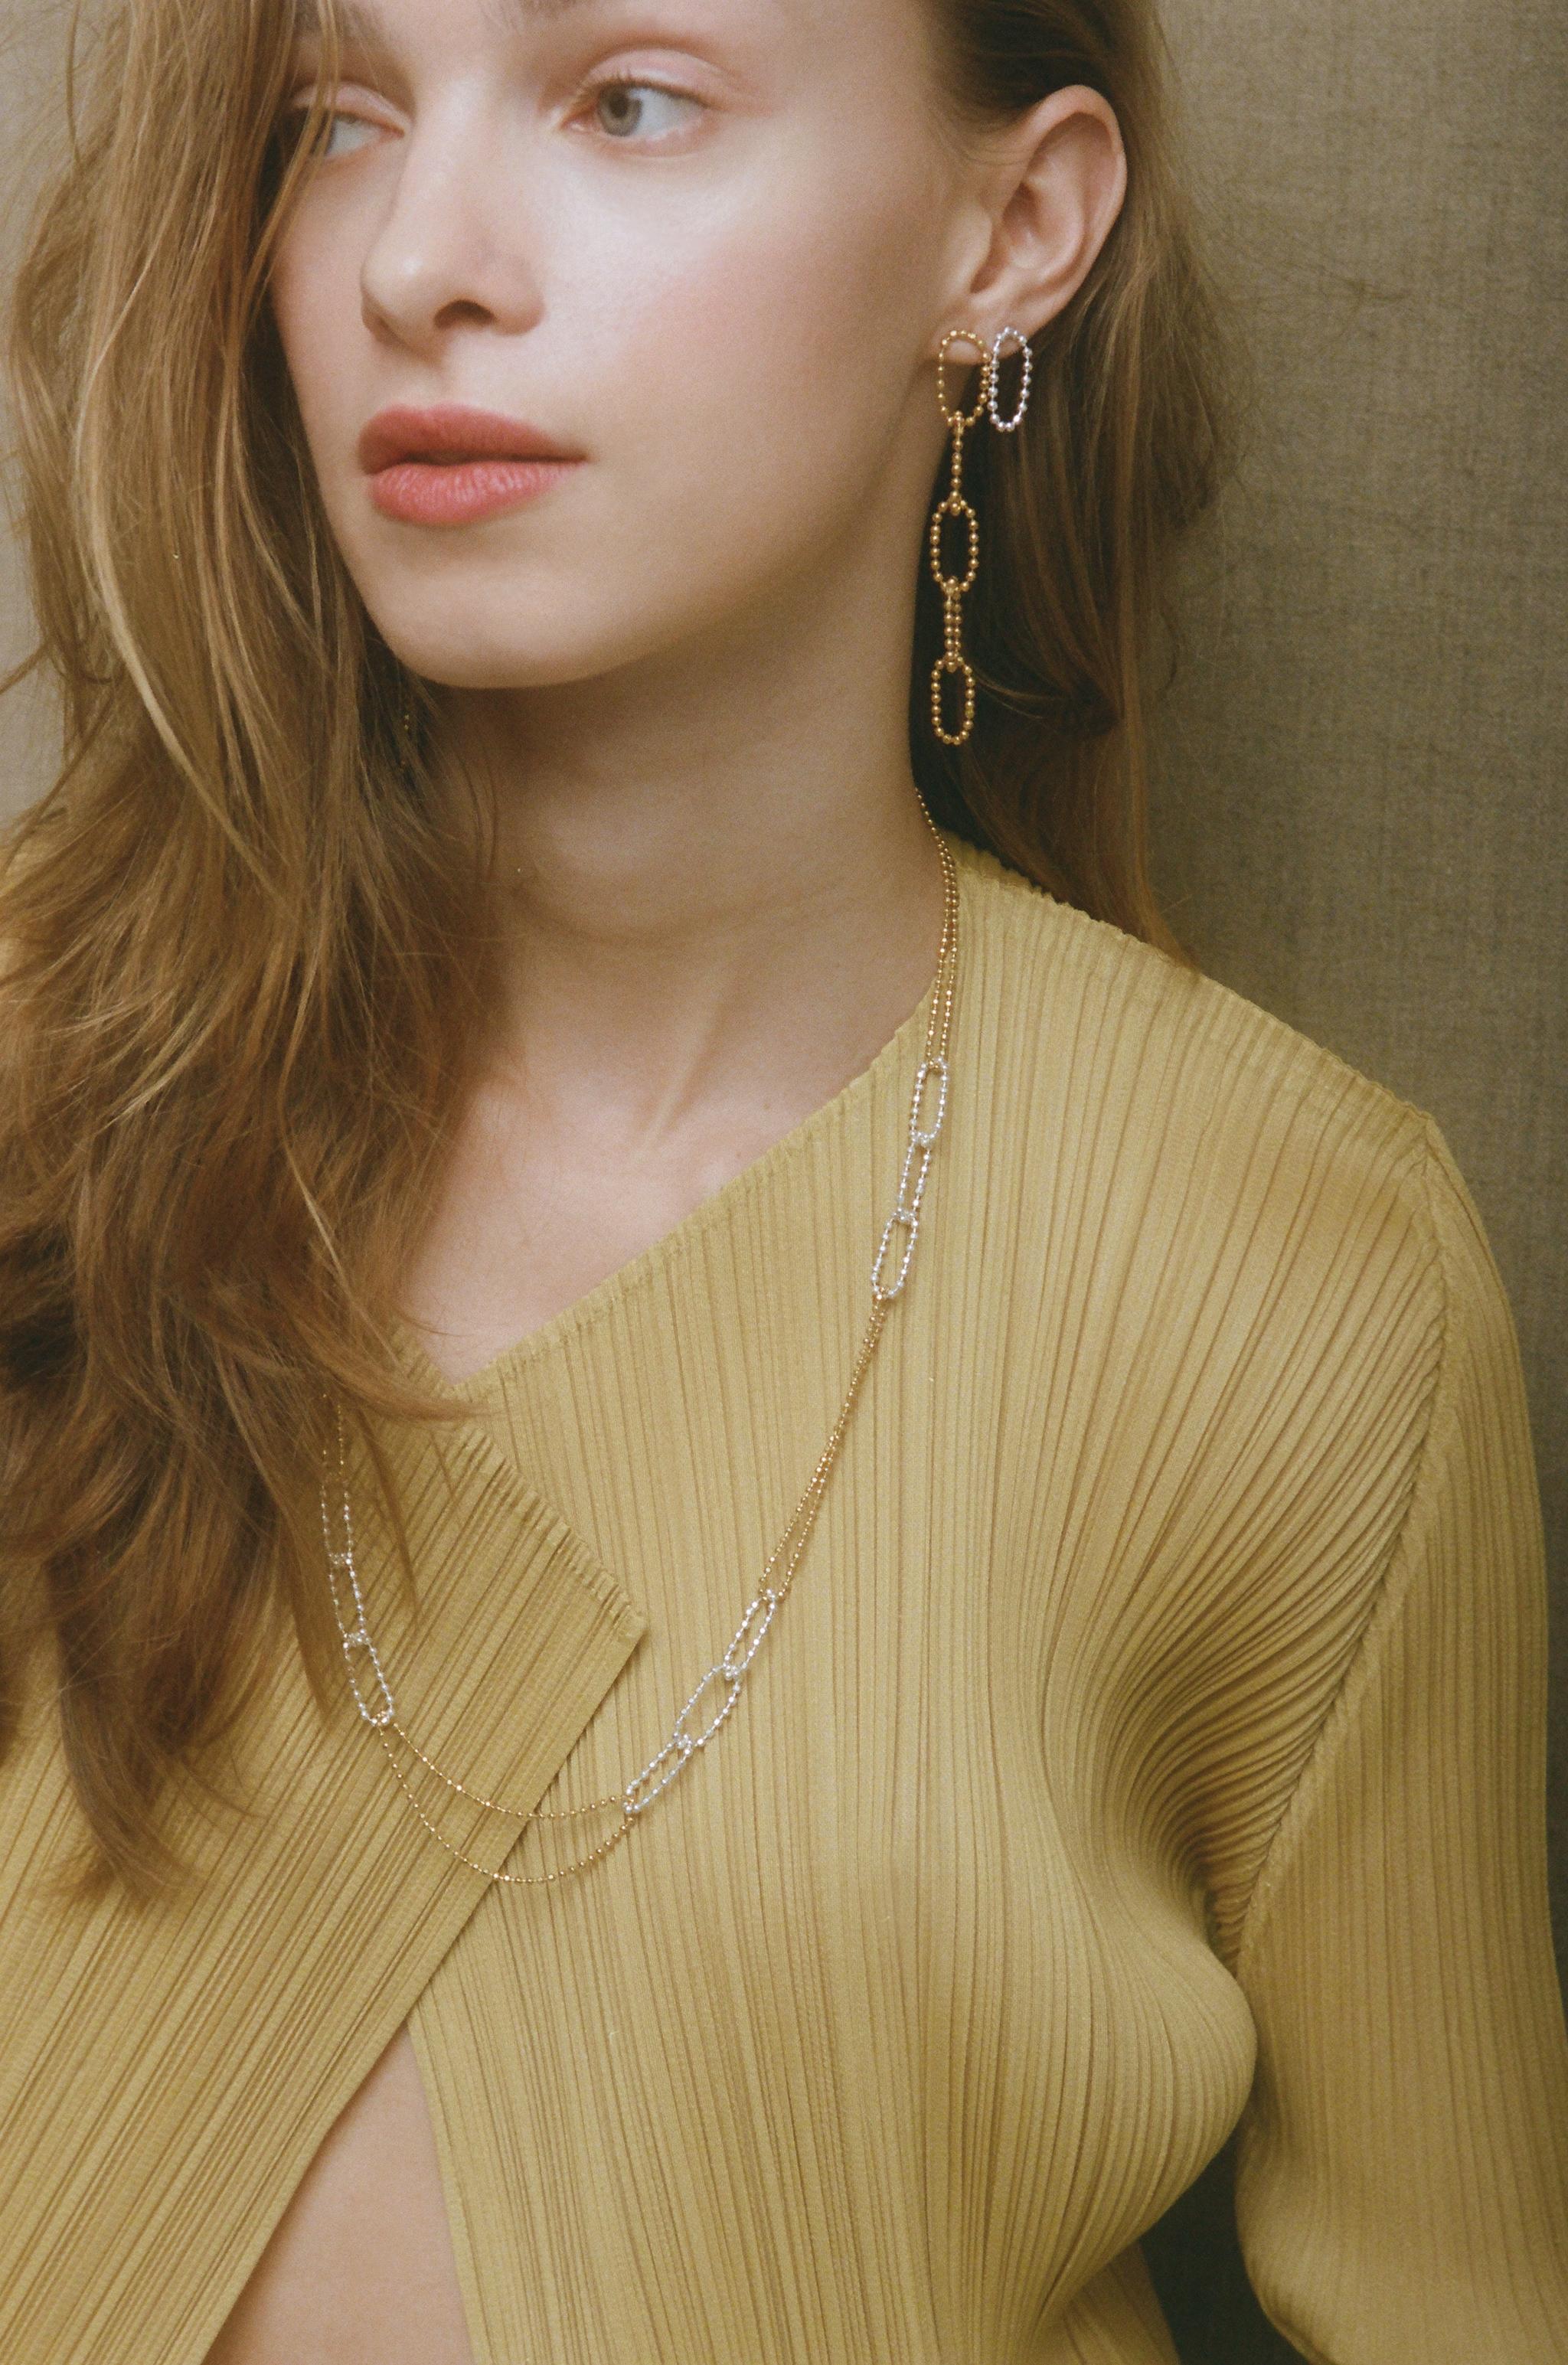 Honeycomb long earrings 

Gold plated, lightweight link earrings made of a delicate sterling silver beaded chain. The chain adds movement to the look and reflects light to make your face glow up. 

All of our earrings have 10 K posts to avoid